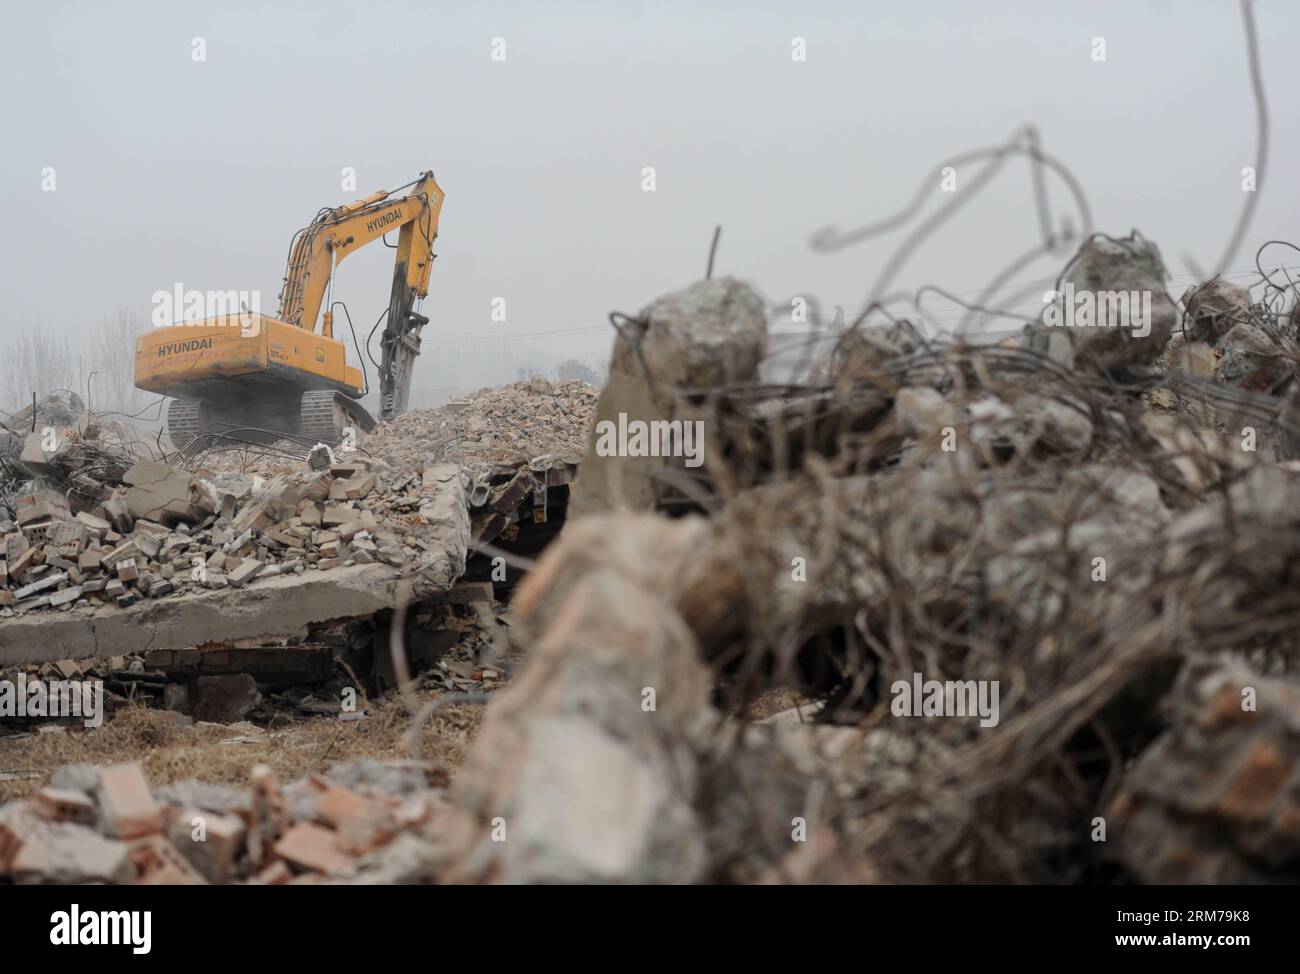 (140220) -- BEIJING, Feb. 20, 2014 (Xinhua) -- An excavator works on ruins of illegal houses demolished in Zhenggezhuang Village, Beiqijia Township of Changping District on the outskirt of Beijing, China, Feb. 20, 2014. Those illegal houses cover an area of 108.55 mu (about 7.24 hectares) , which will be used for tree planting after complete of demolition. (Xinhua/Luo Xiaoguang) (hdt) CHINA-BEIJING-CHANGPING-ILLEGAL HOUSES-DEMOLITION (CN) PUBLICATIONxNOTxINxCHN   Beijing Feb 20 2014 XINHUA to excavator Works ON Ruins of illegal Houses Demolished in  Village  Township of Chang Ping District ON Stock Photo